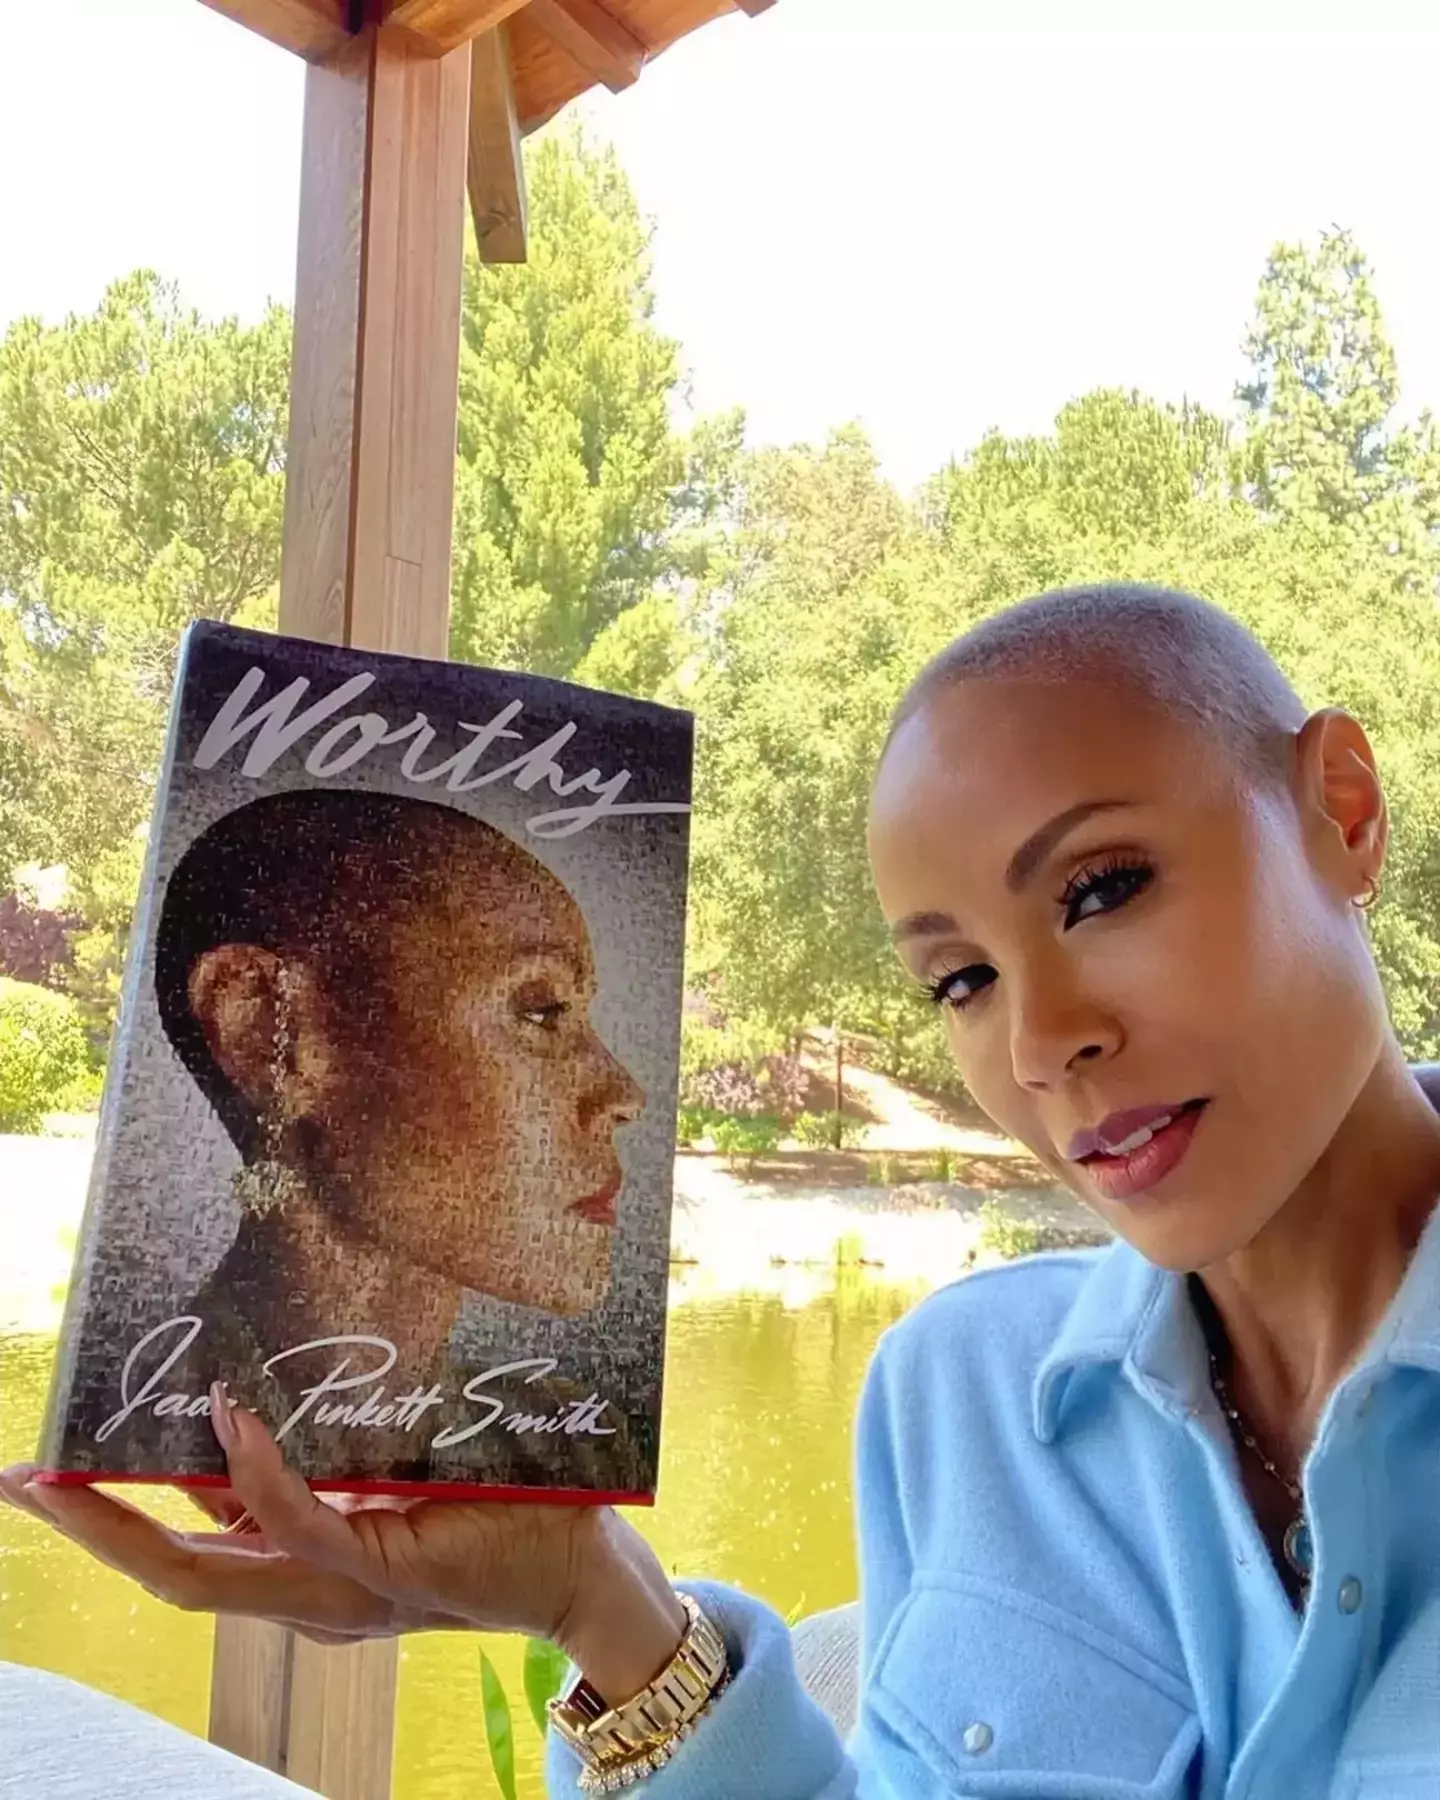 Jada Pinkett Smith's autobiography is out tomorrow.